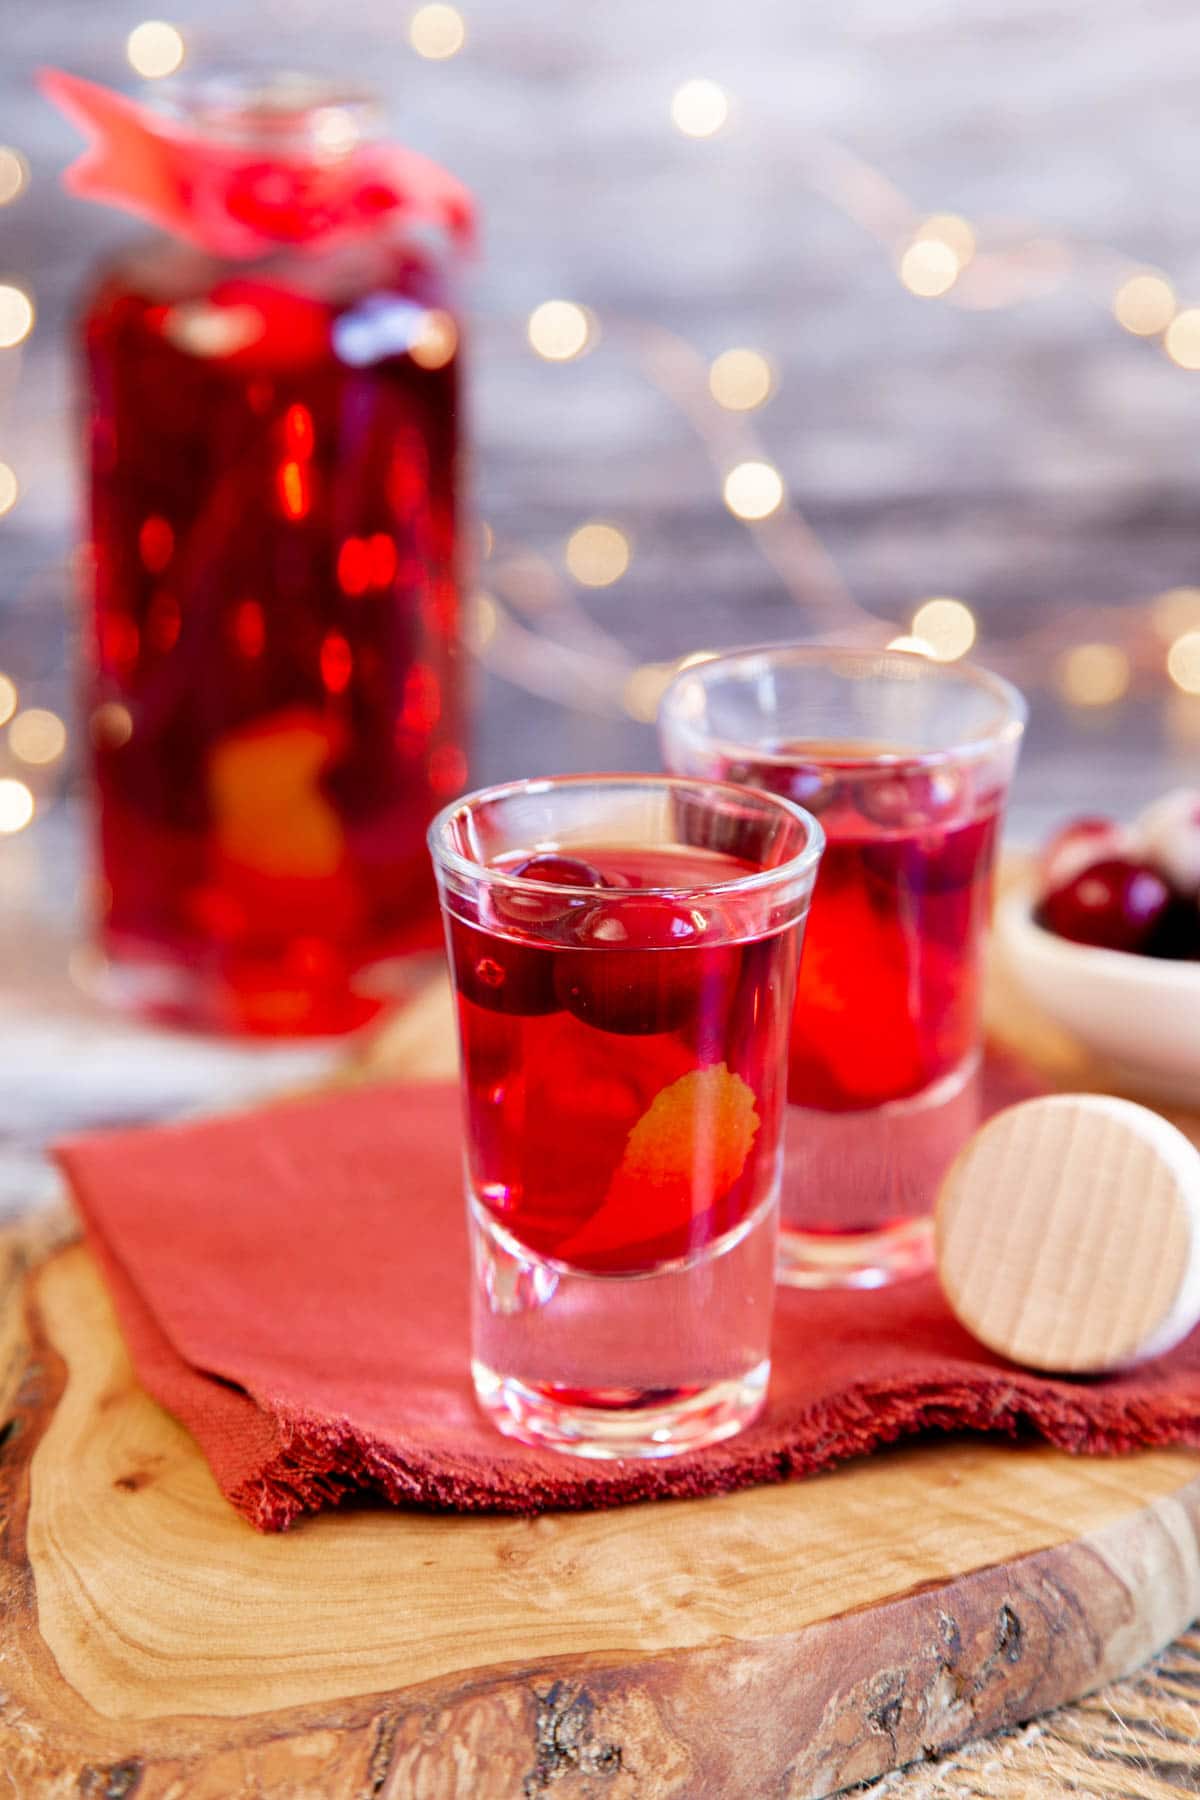 Cranberry vodka looks as good as it tastes, glowing a warming winter red against festive fairy lights.